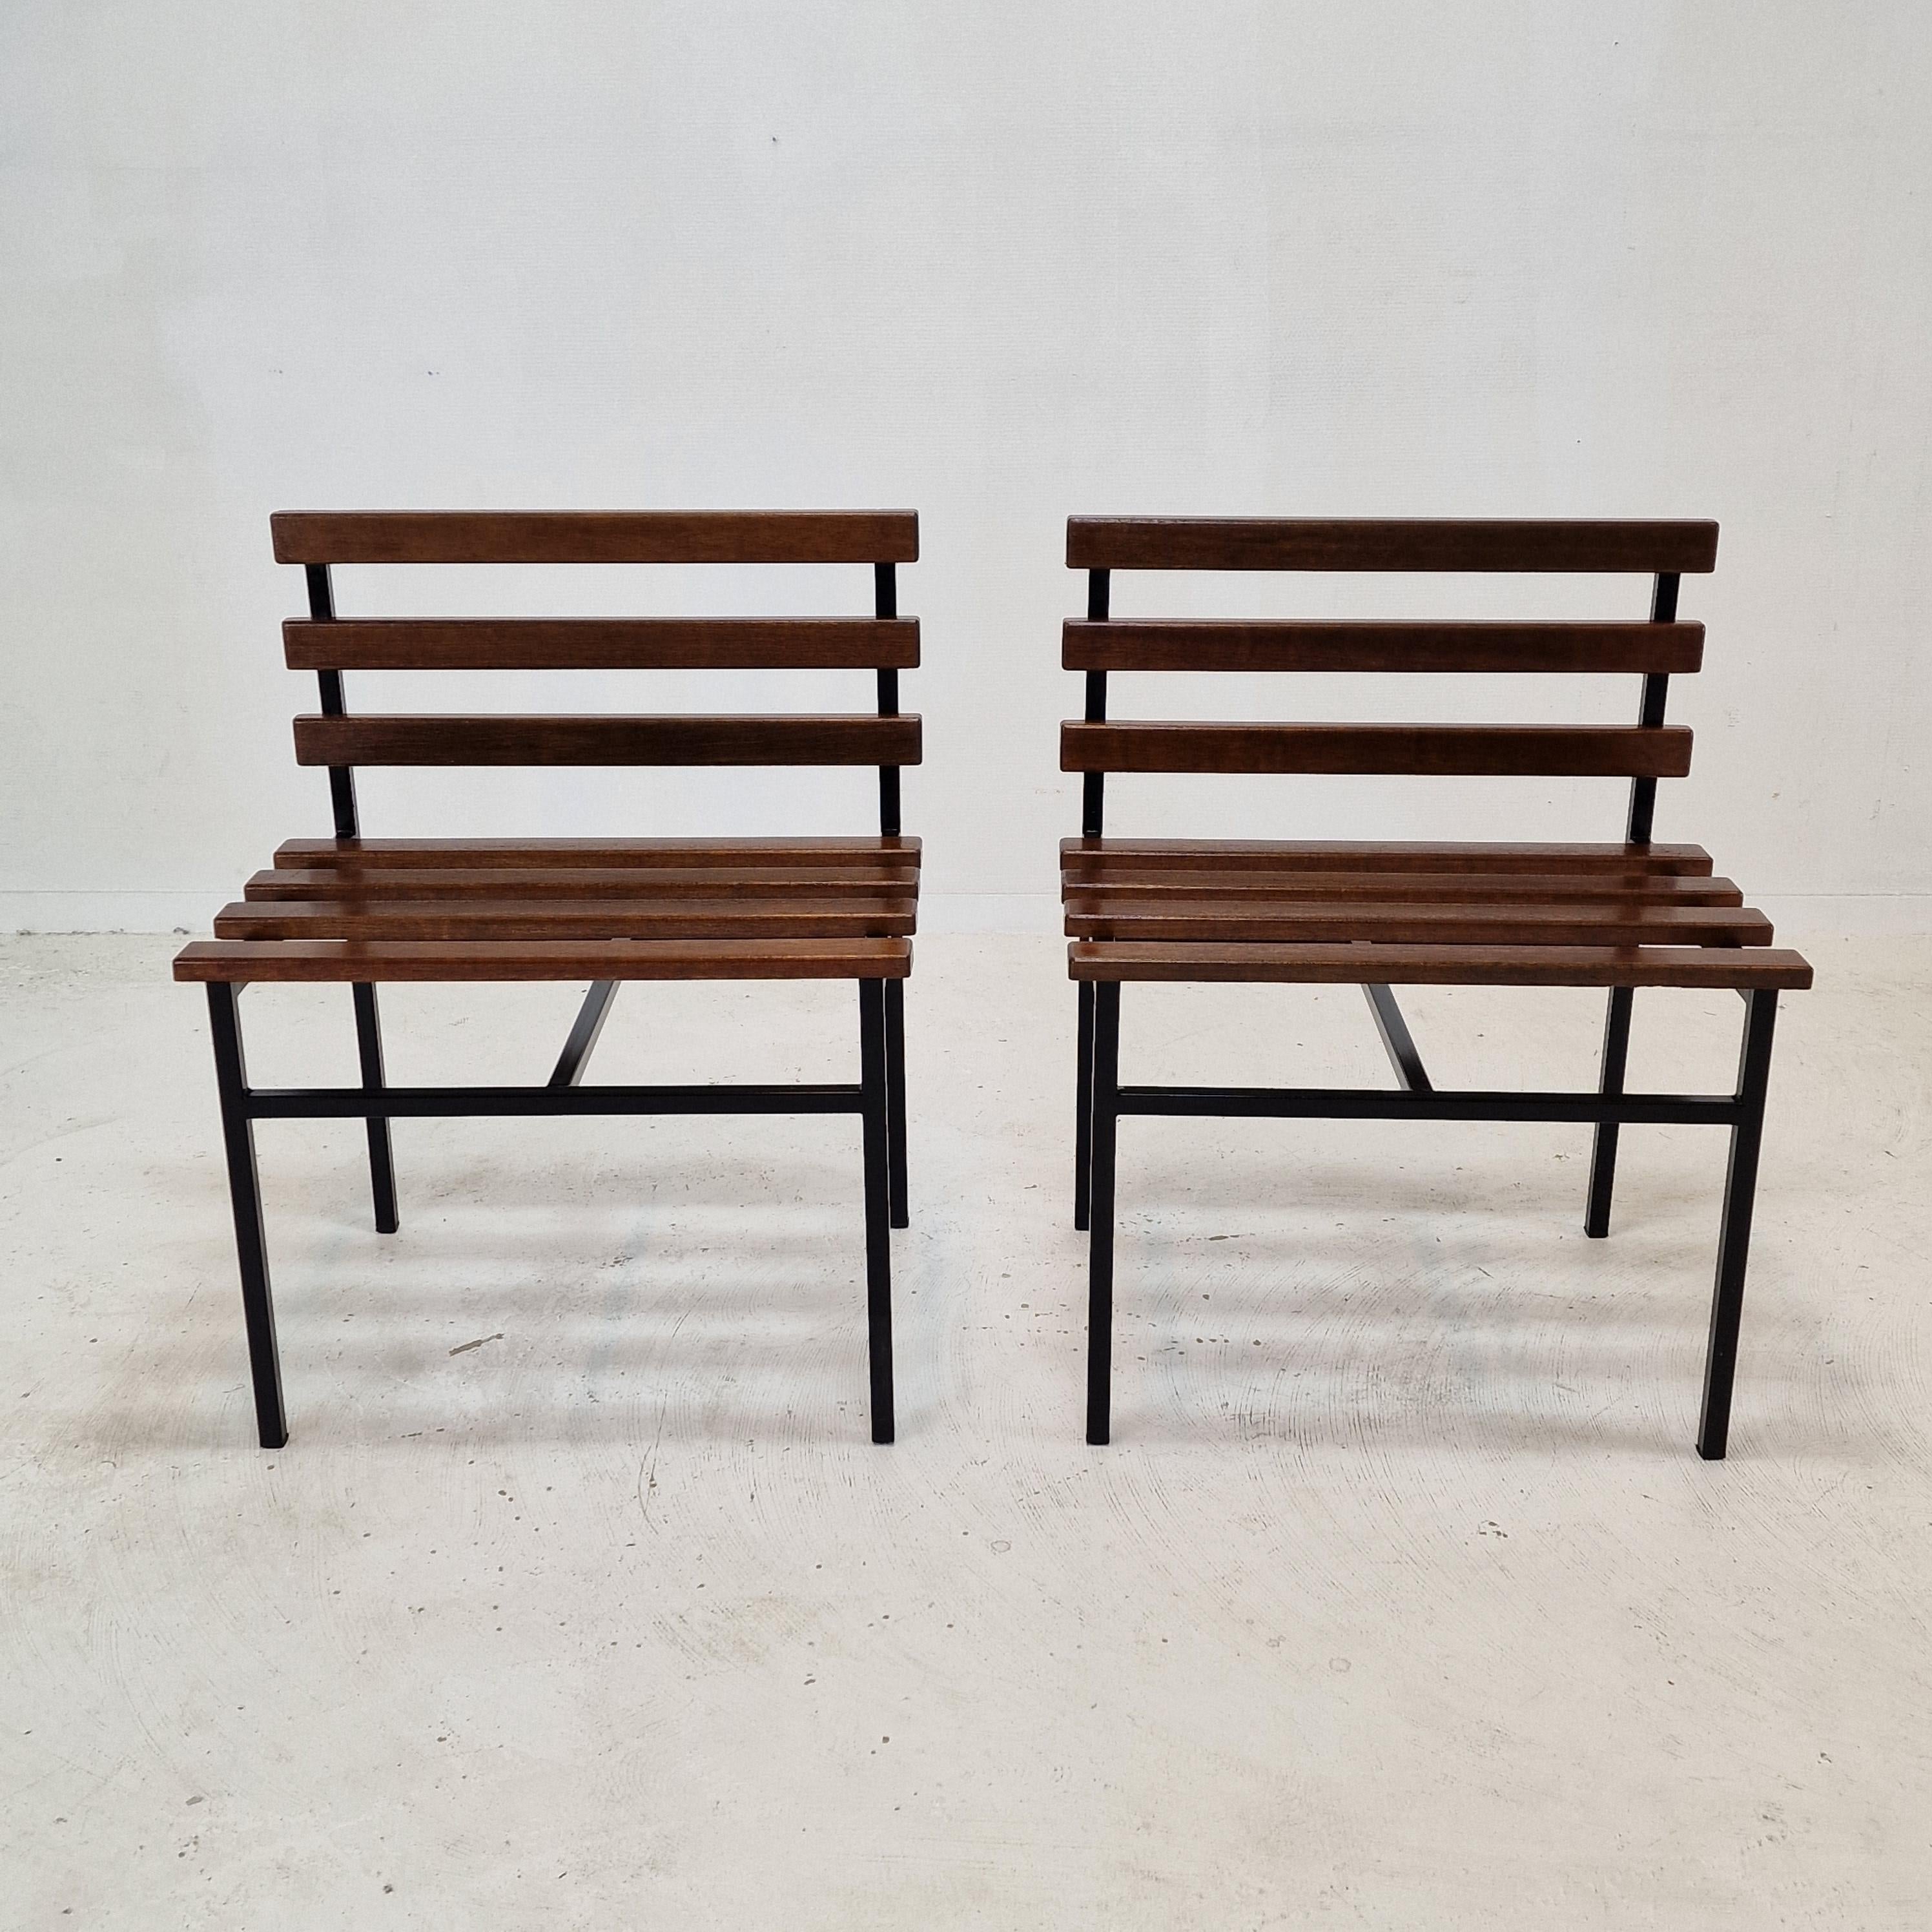 Mid-Century Modern Midcentury Set of 2 Chairs or Benches in Teak, Italy, 1960s For Sale